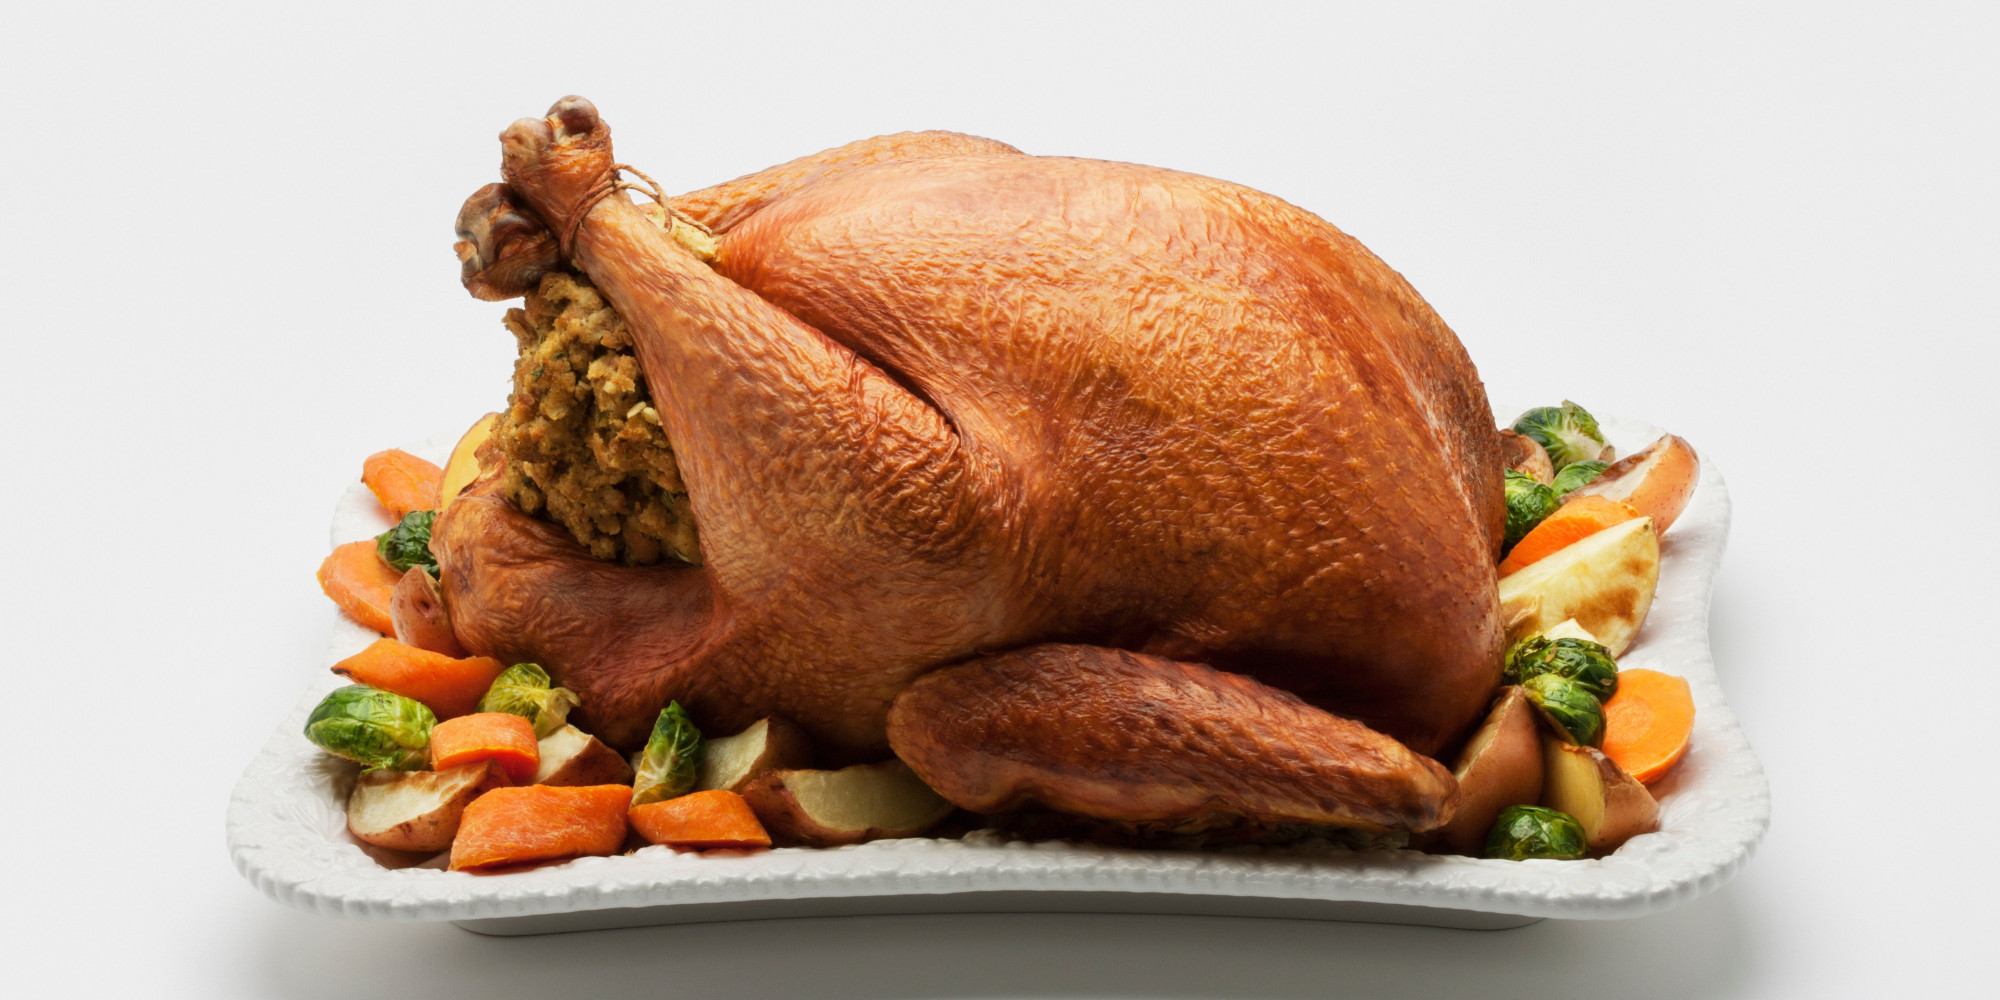 Thanksgiving Turkey Image
 Tryptophan Making You Sleepy Is A Big Fat Lie